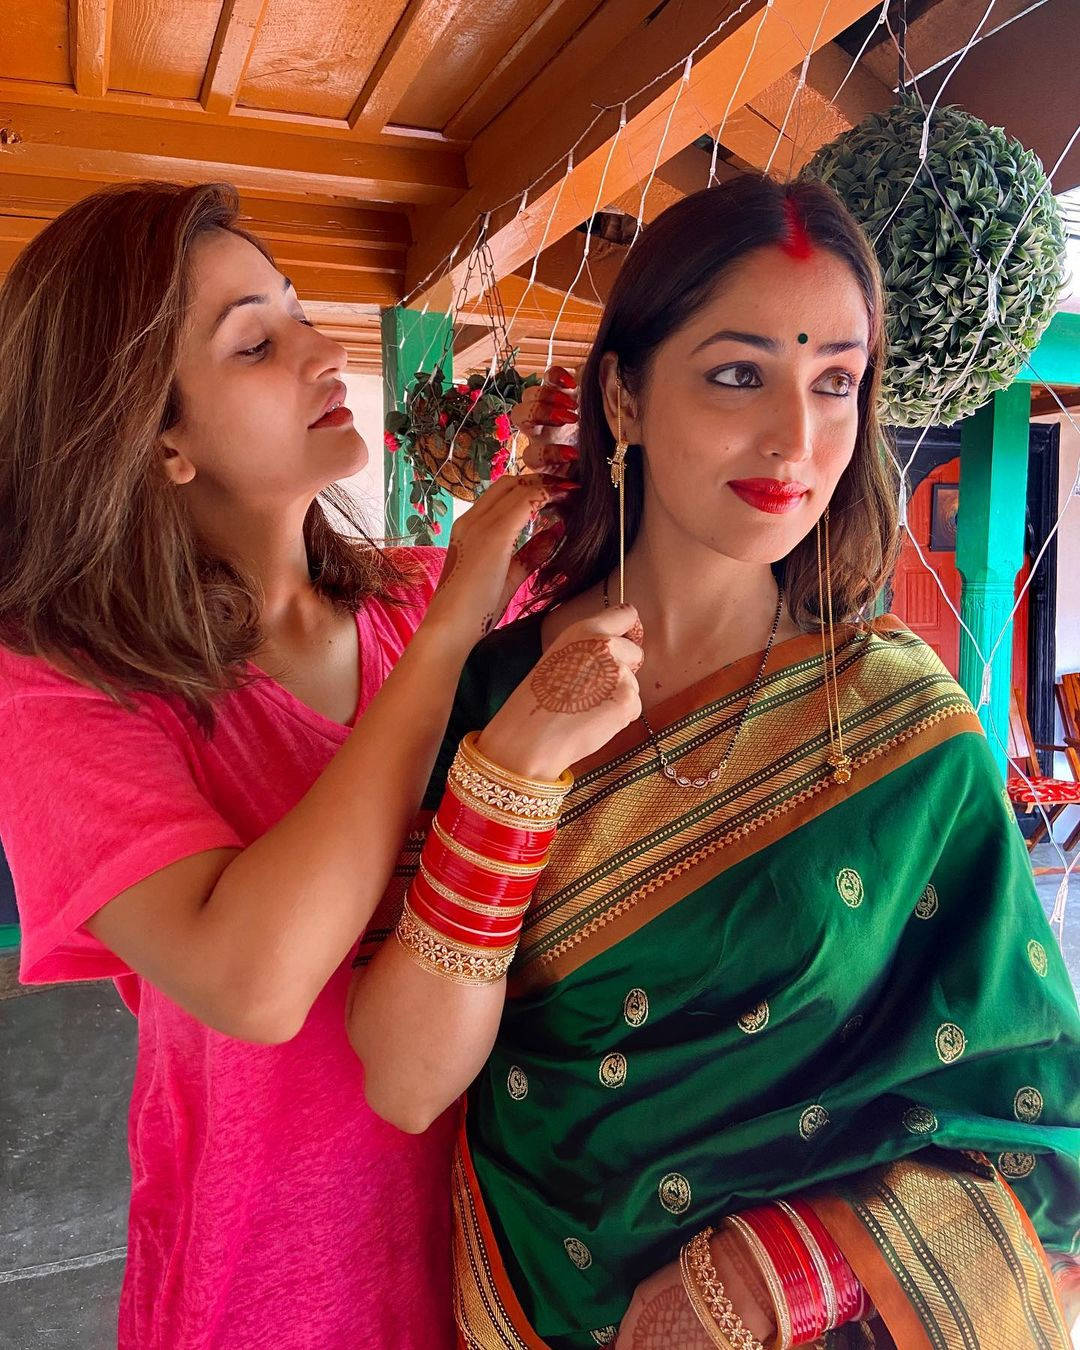 Yami Gautam rocks an exquisite diamond mangalsutra in latest post-wedding picture | Hindi Movie News - Times of India